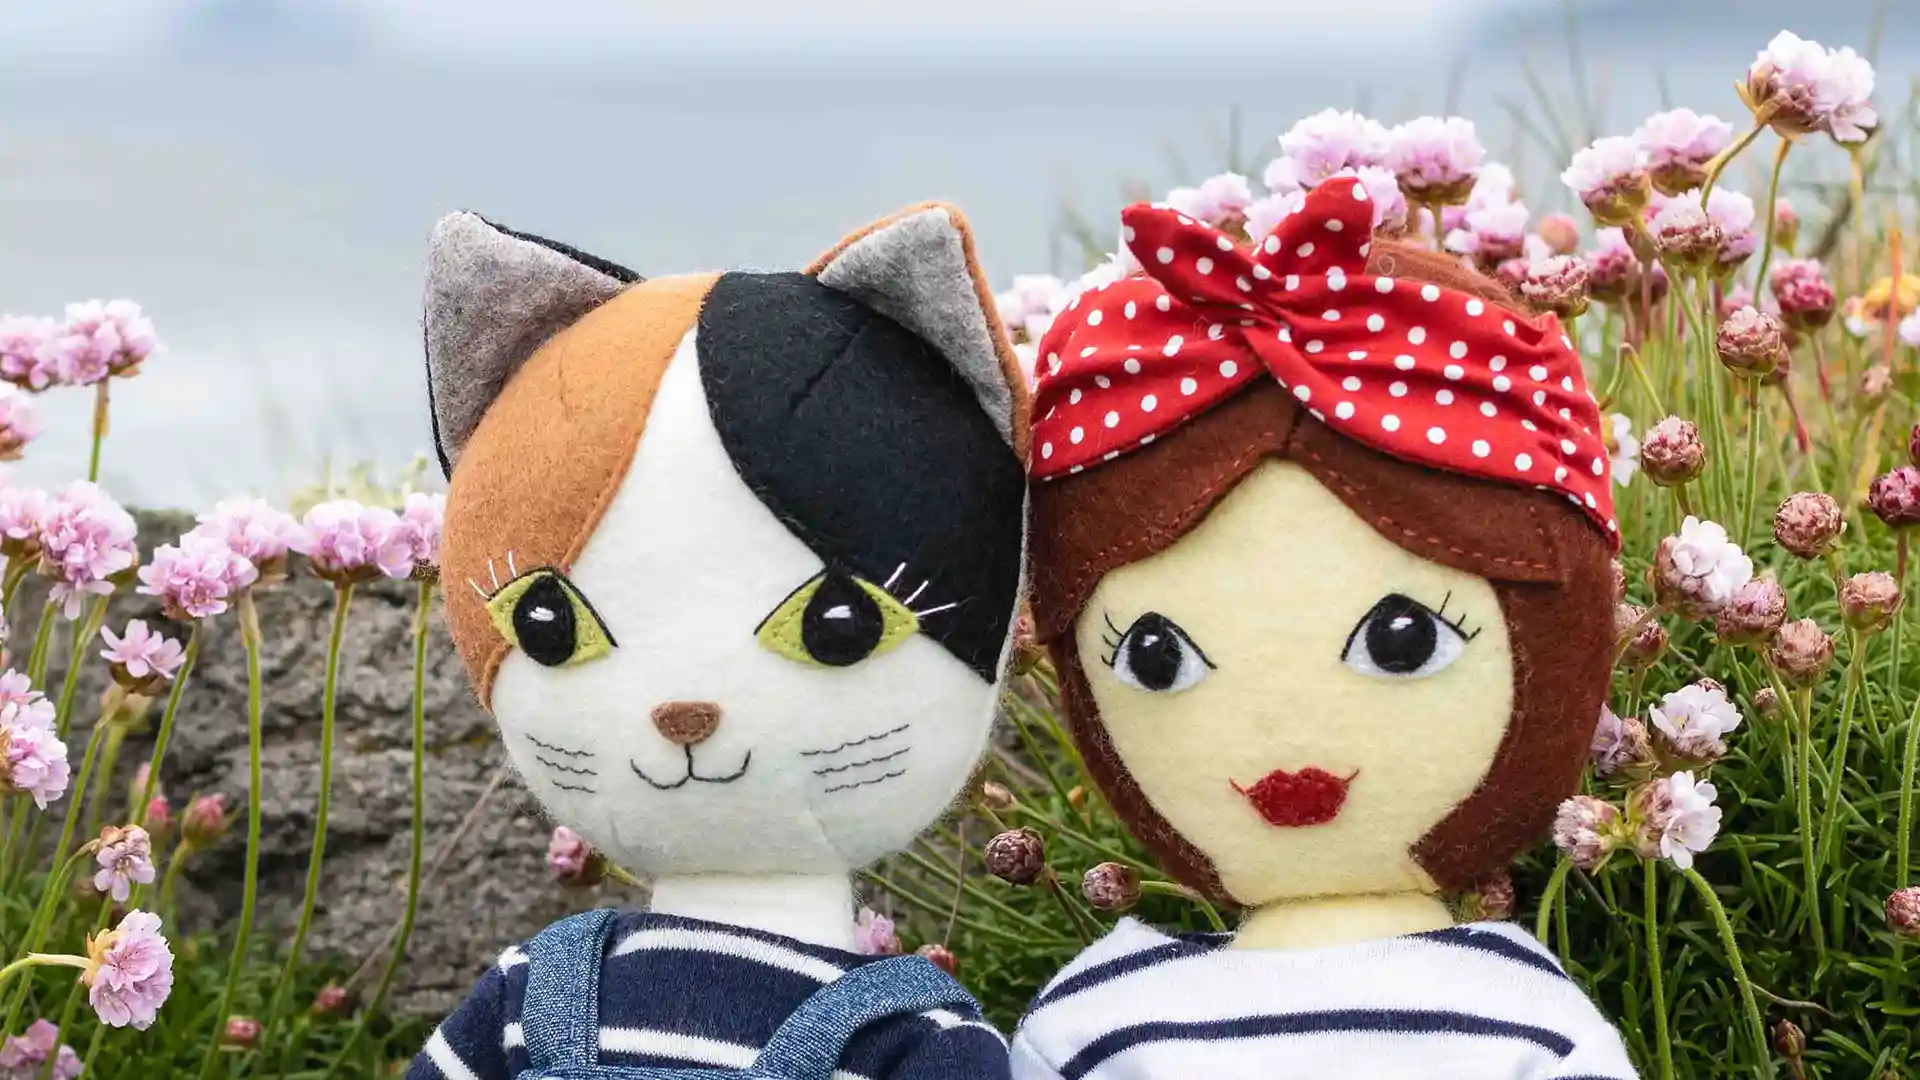 Tilly and Puffin, a felt cat and felt girl doll, sitting on a clifftop among the sea pink flowers.